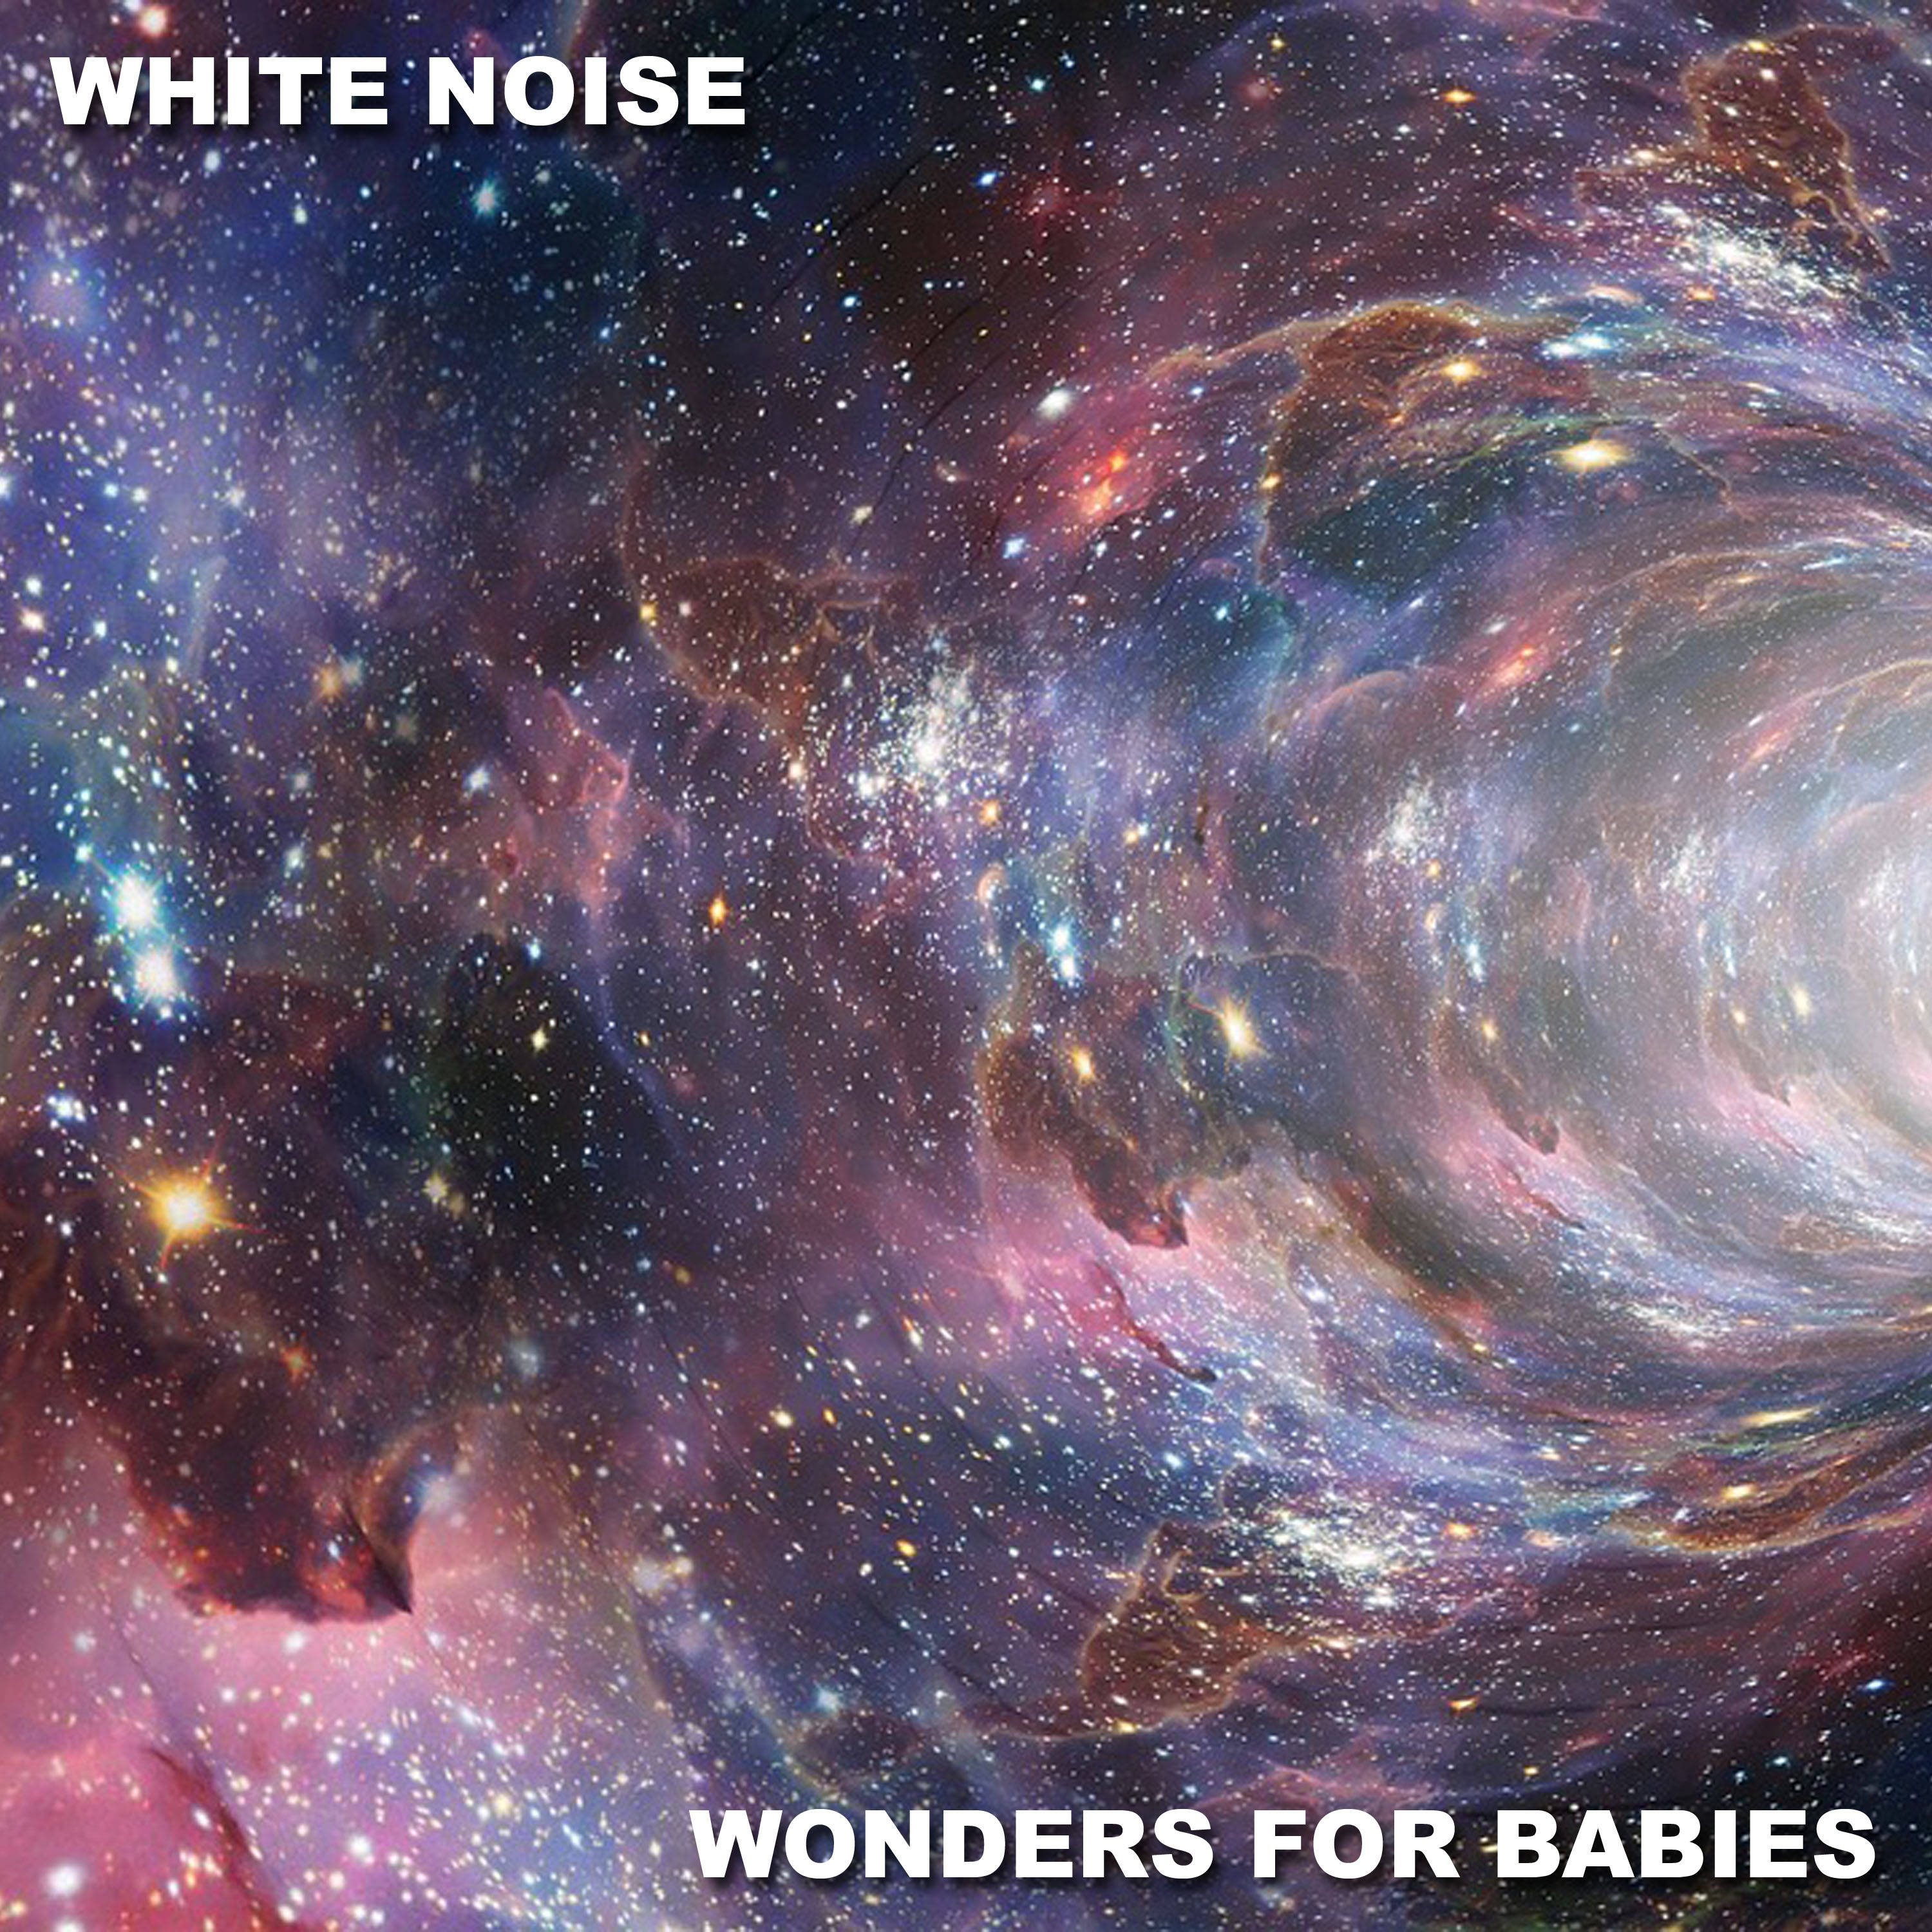 11 Meditative White Noise Relaxation Wonders for Babies